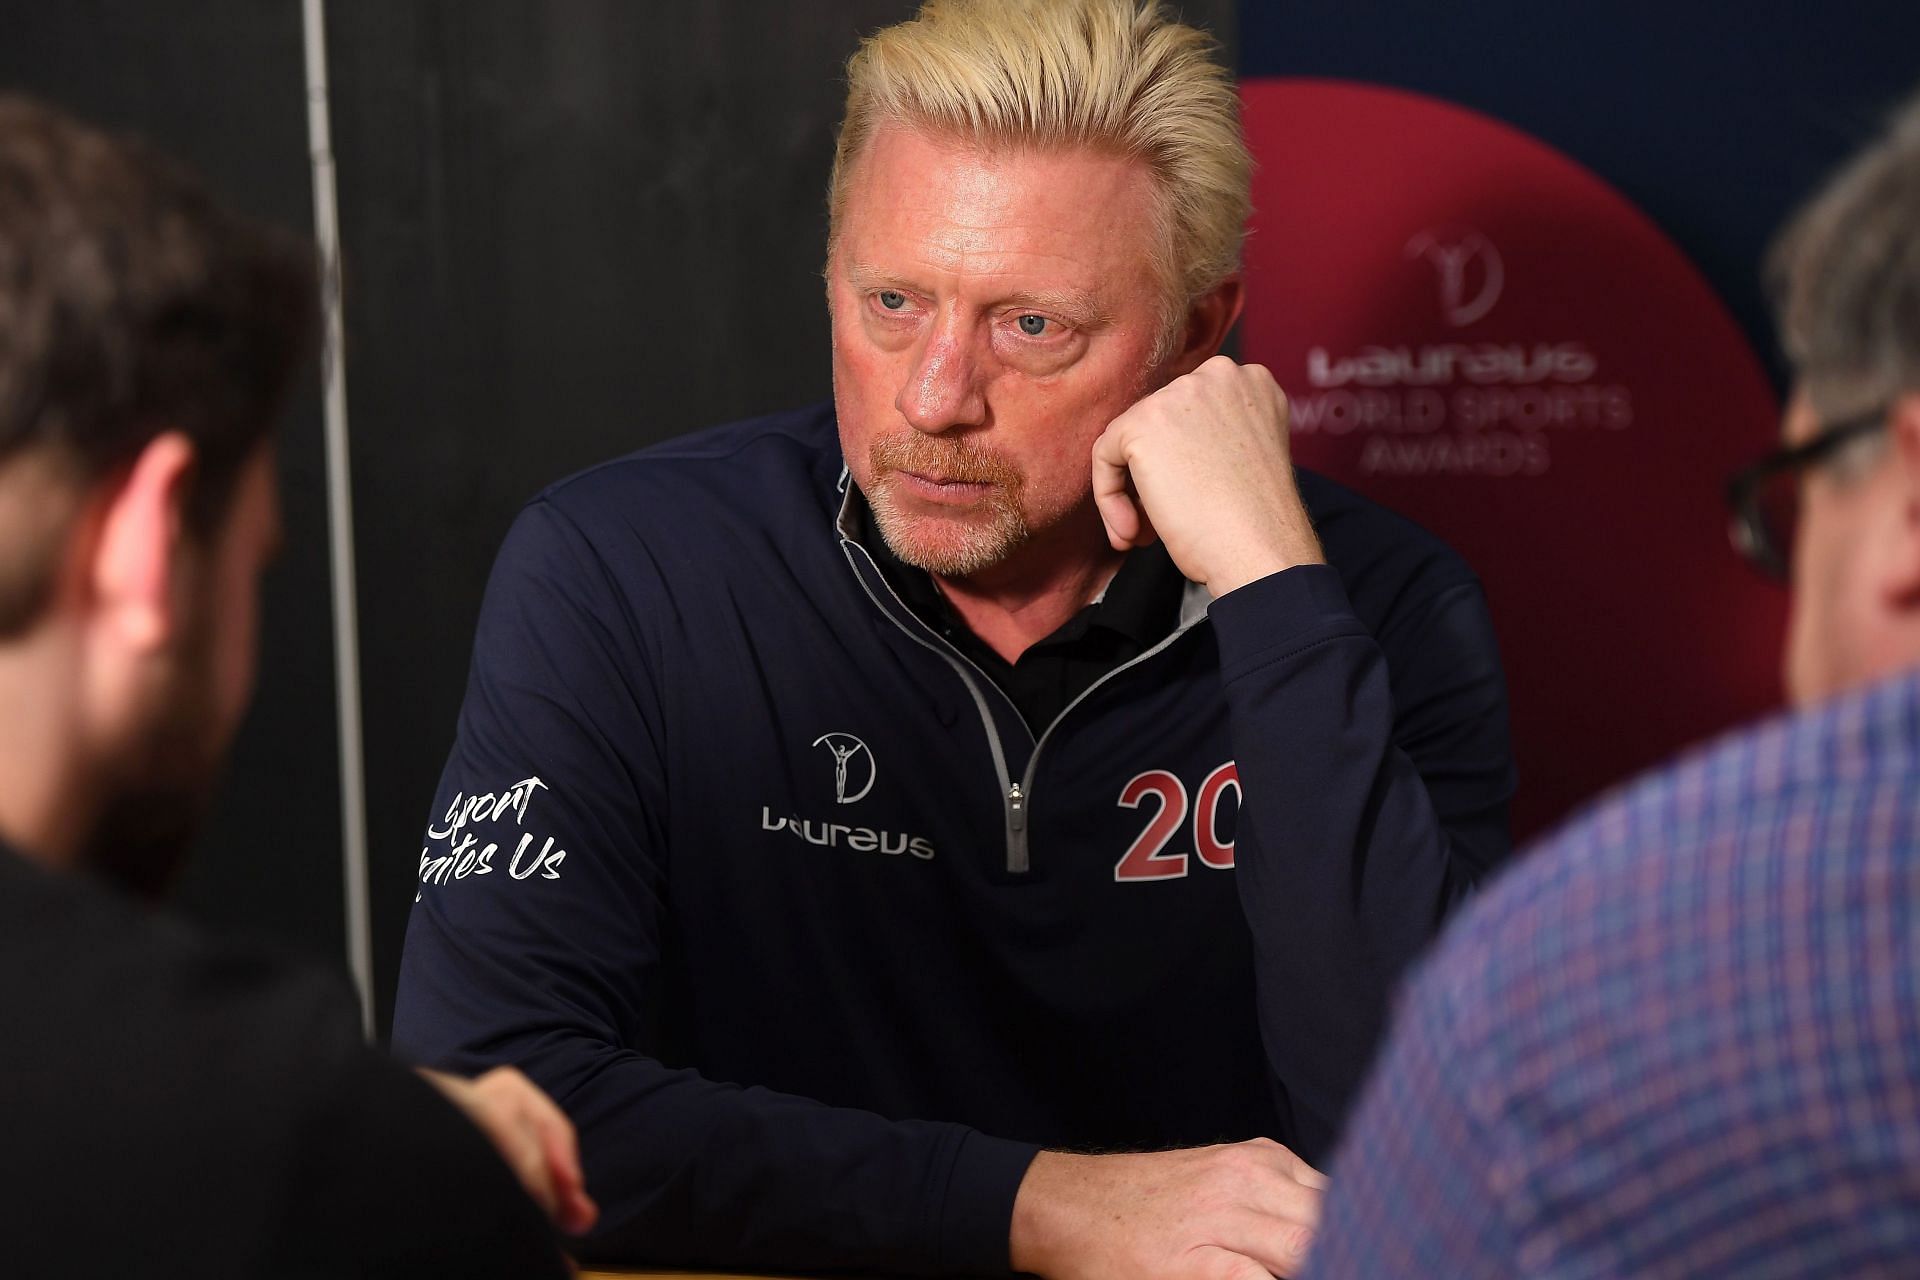 Boris Becker during a media interview at the 2020 Laureus World Sports Awards in Berlin